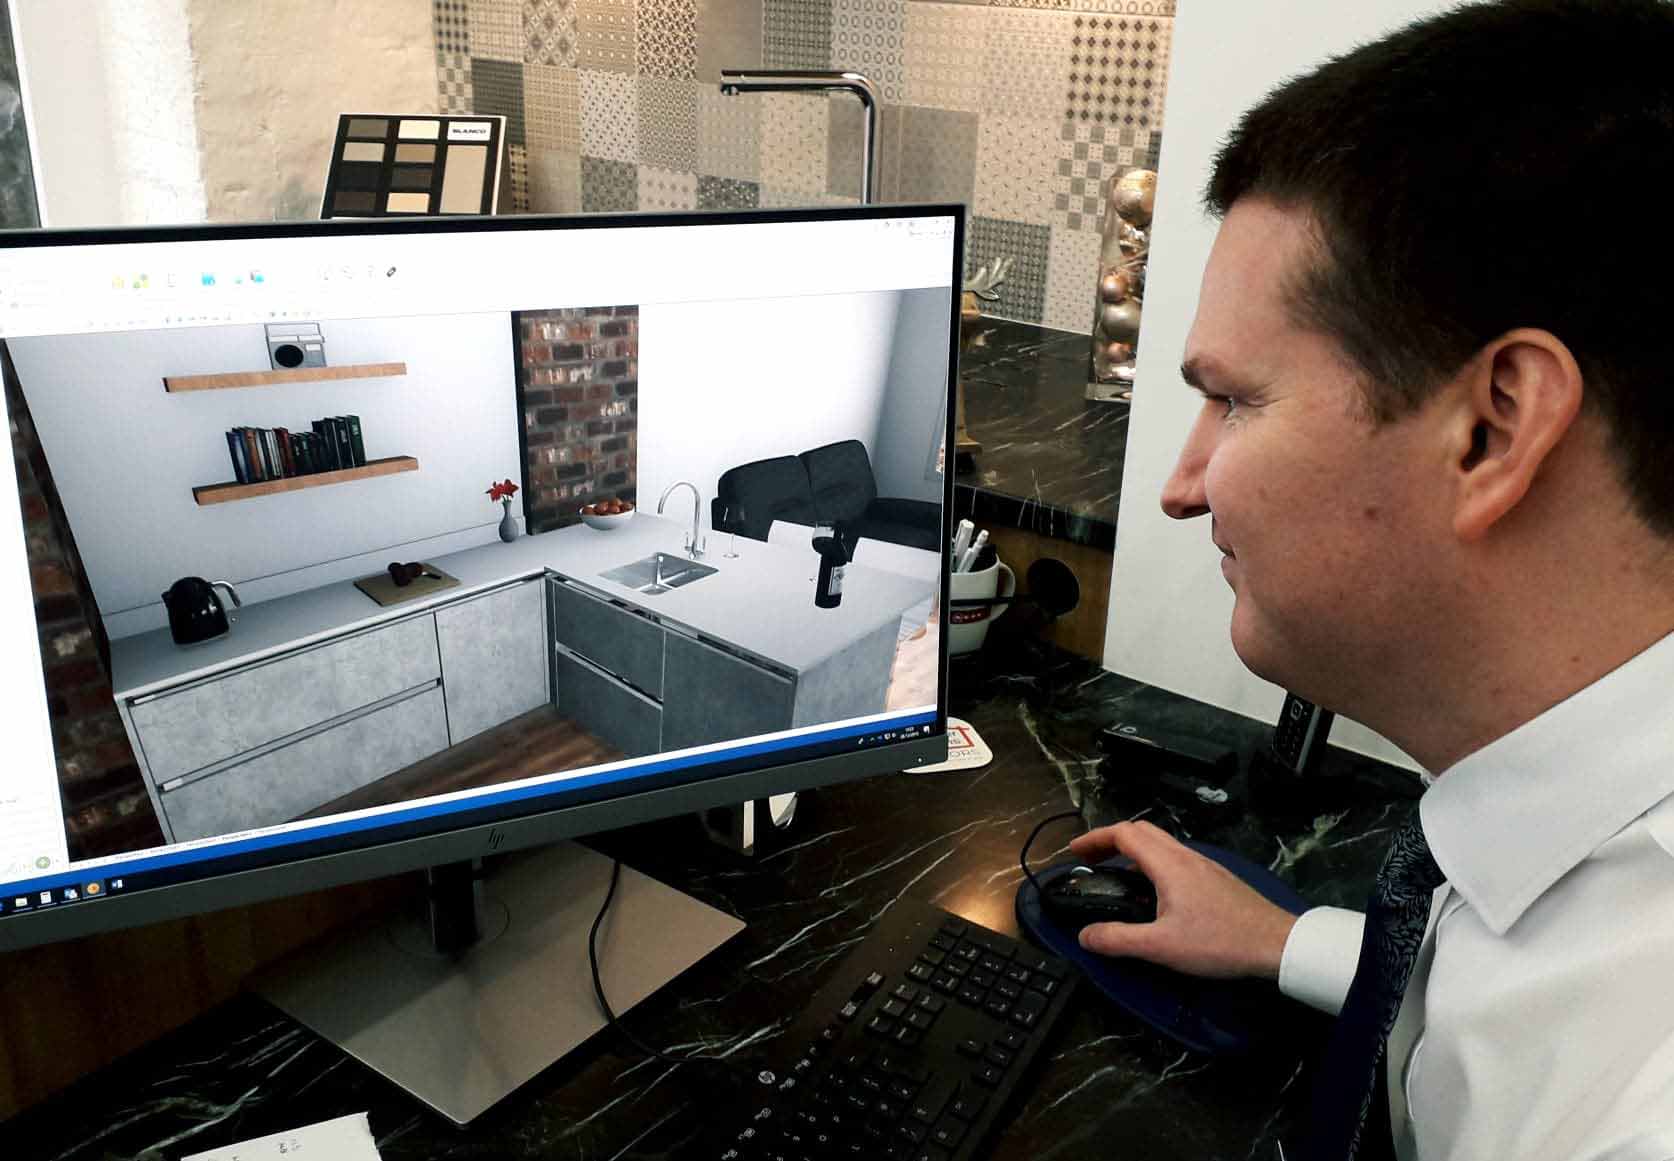 A man sitting at a computer with a computer generated image of a kitchen on the screen